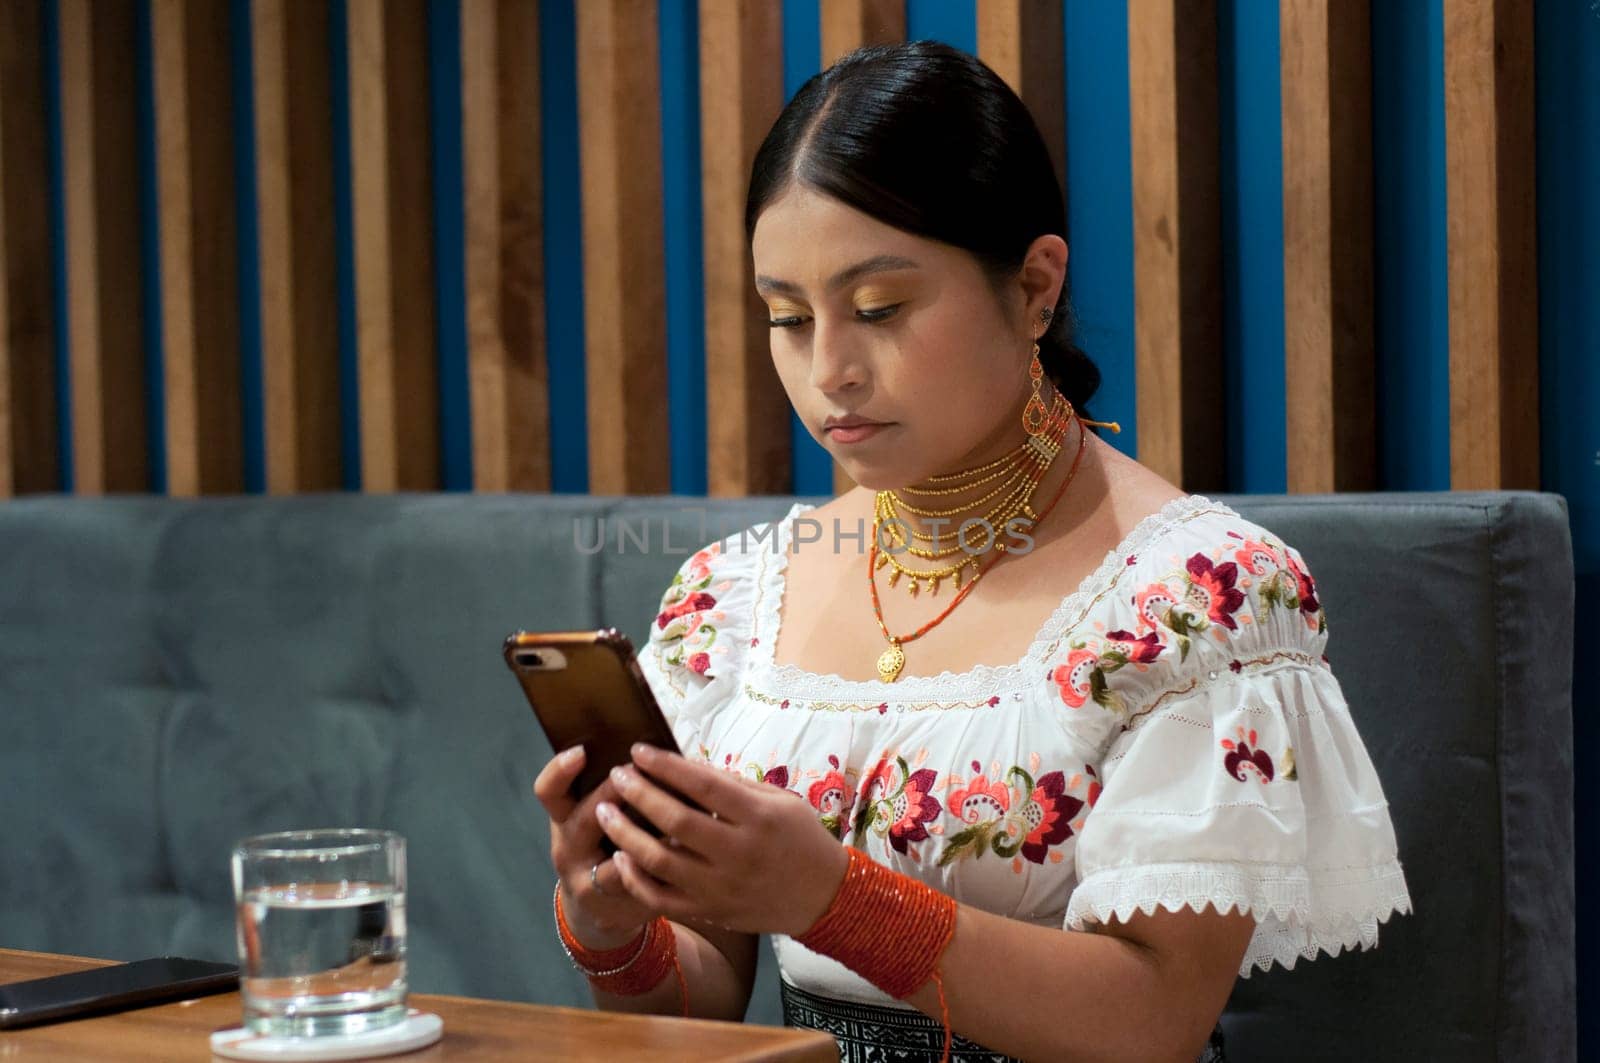 indigenous woman from otavalo, ecuador in traditional dress concentrating while writing a text message with her cell phone in a restaurant. by Raulmartin